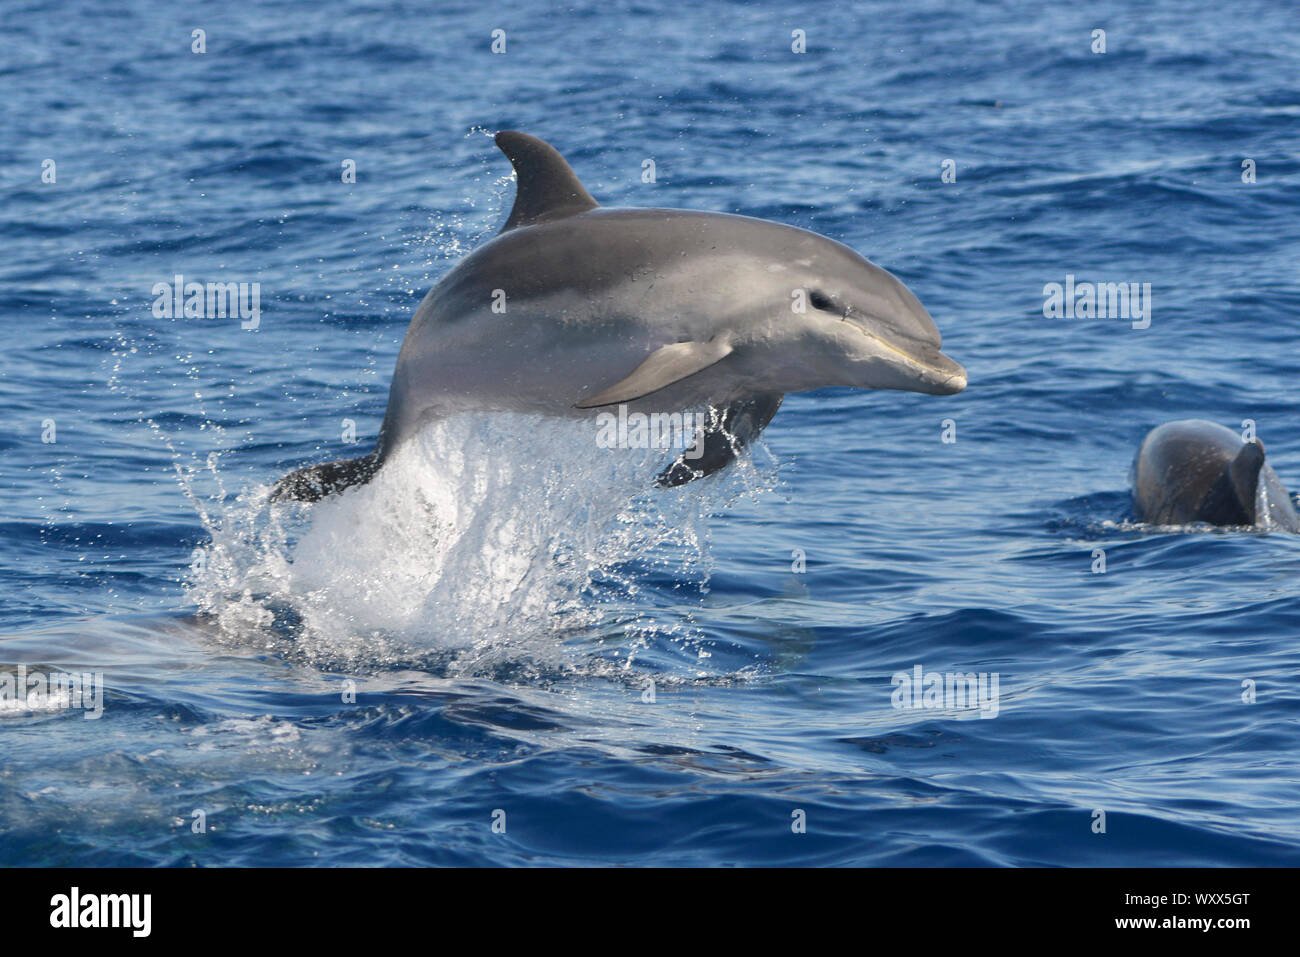 Bottlenose dolphin (Tursiops truncatus). Juvenile playing and jumping on surface. Tenerife, Canary Islands. Stock Photo